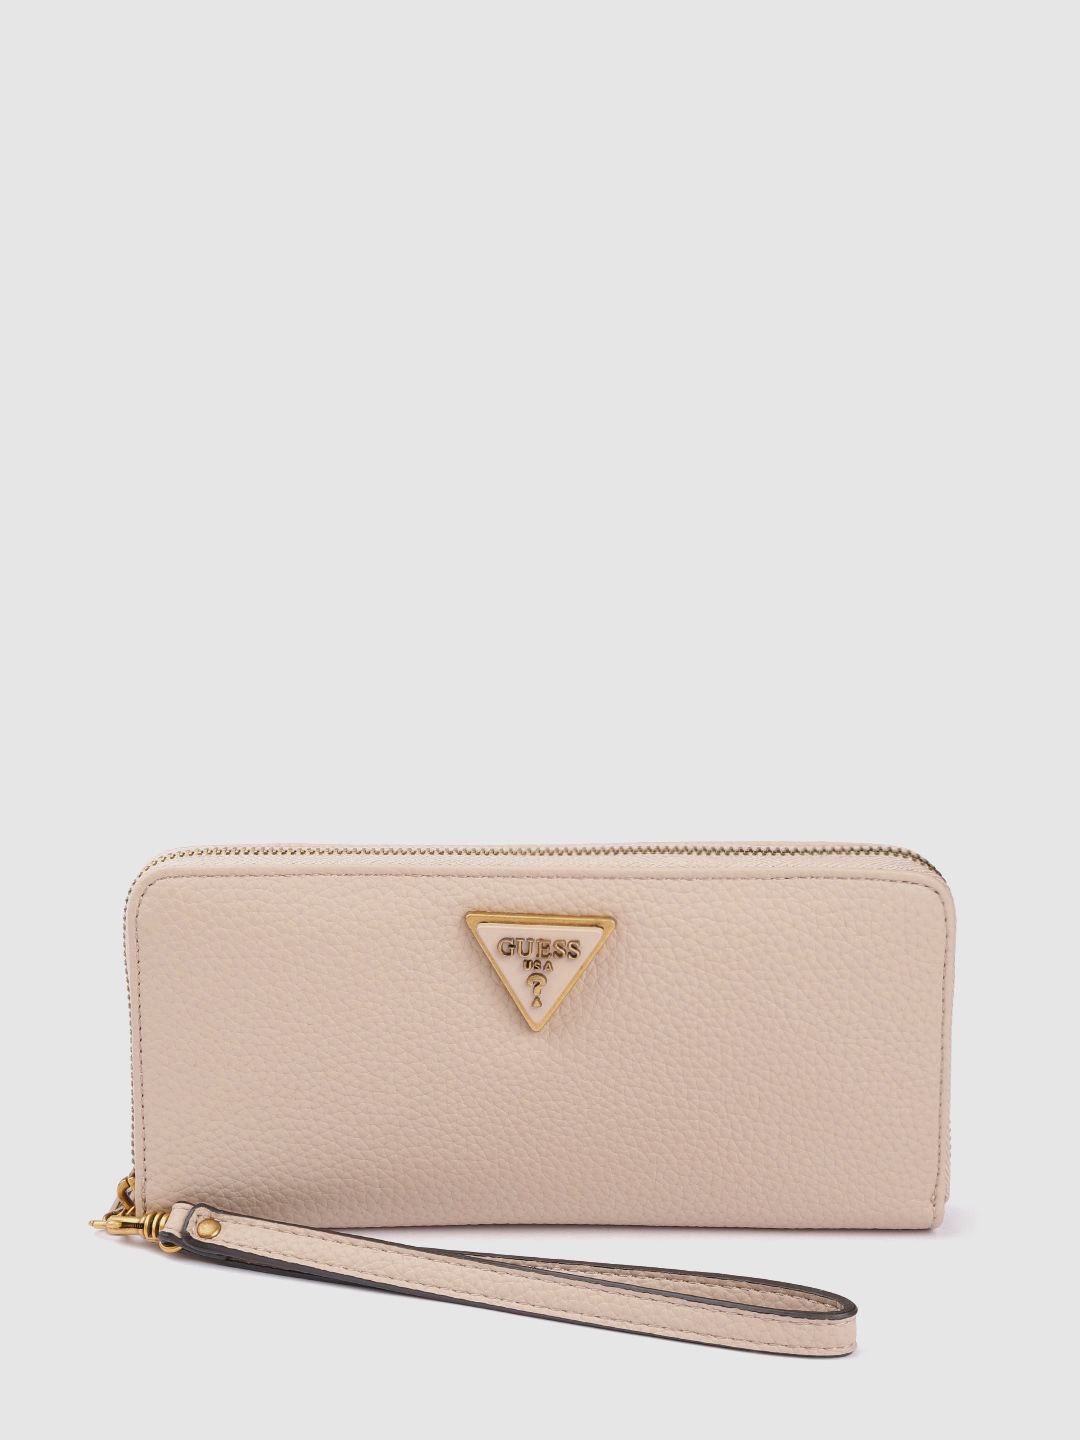 GUESS Women Peach-Coloured Saffiano Textured Zip Around Wallet Price in India